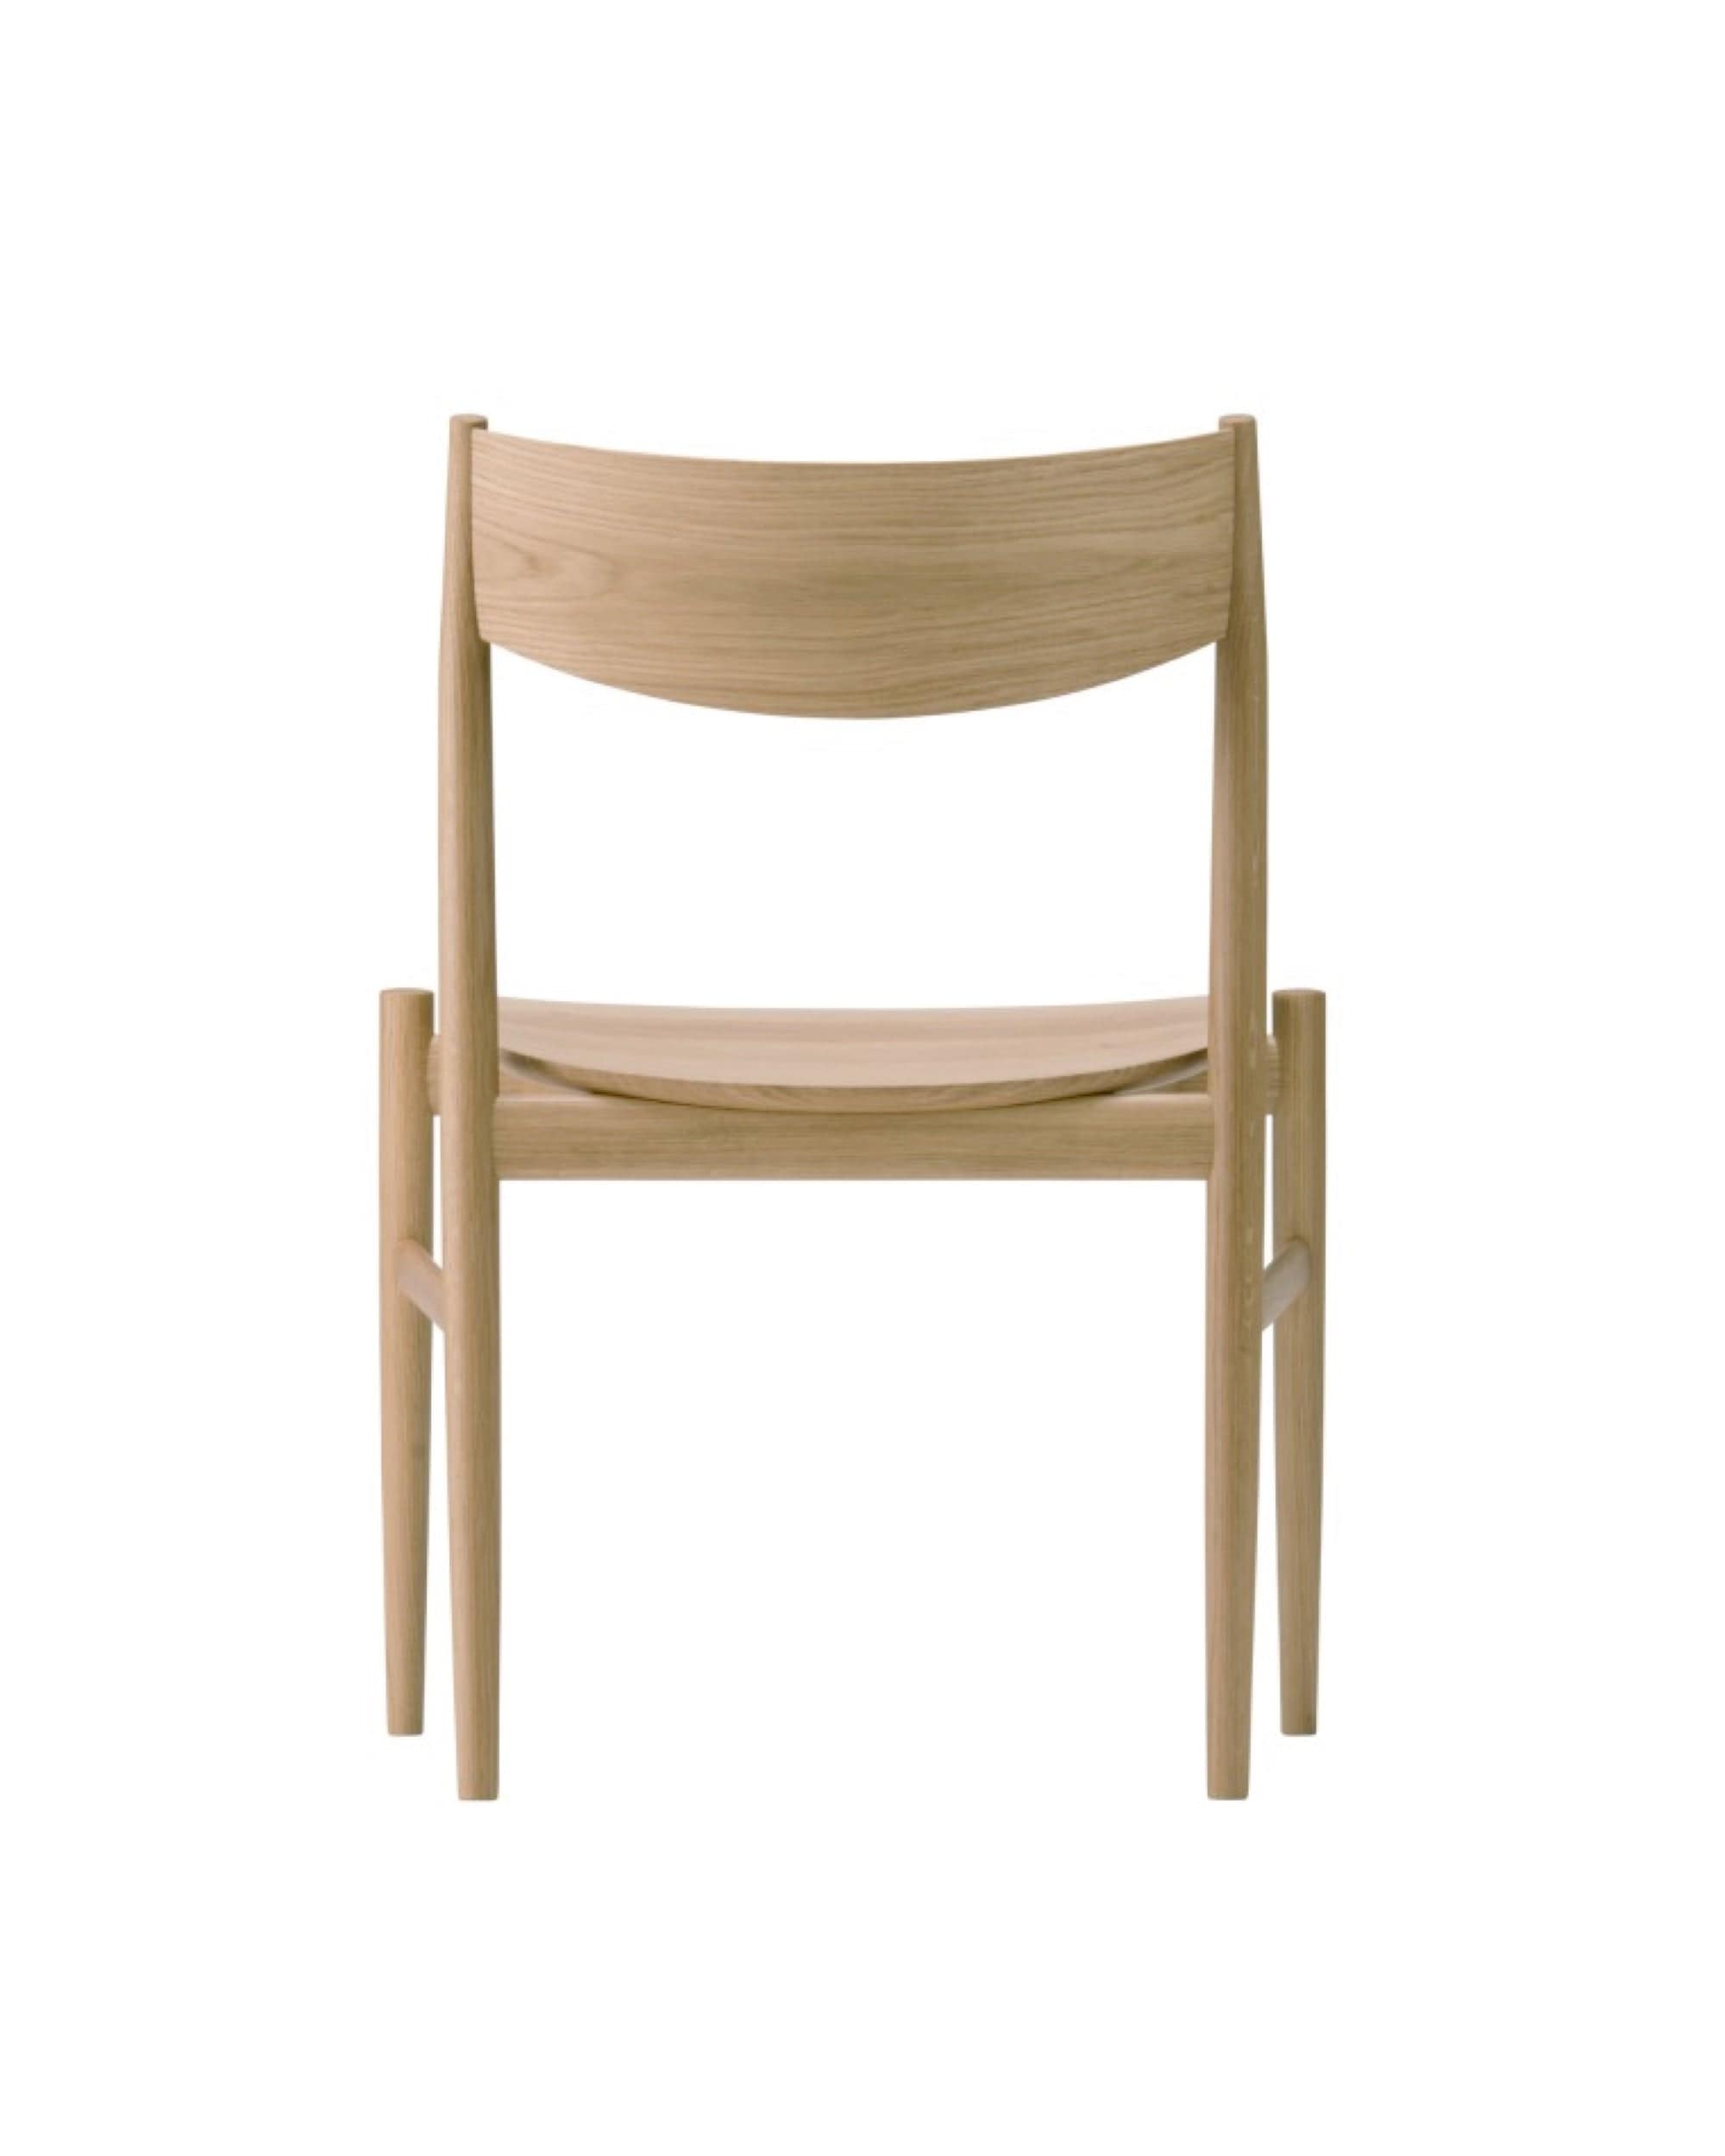 KAMUY Side Chair (Wooden Seat), Japanese Oak Natural